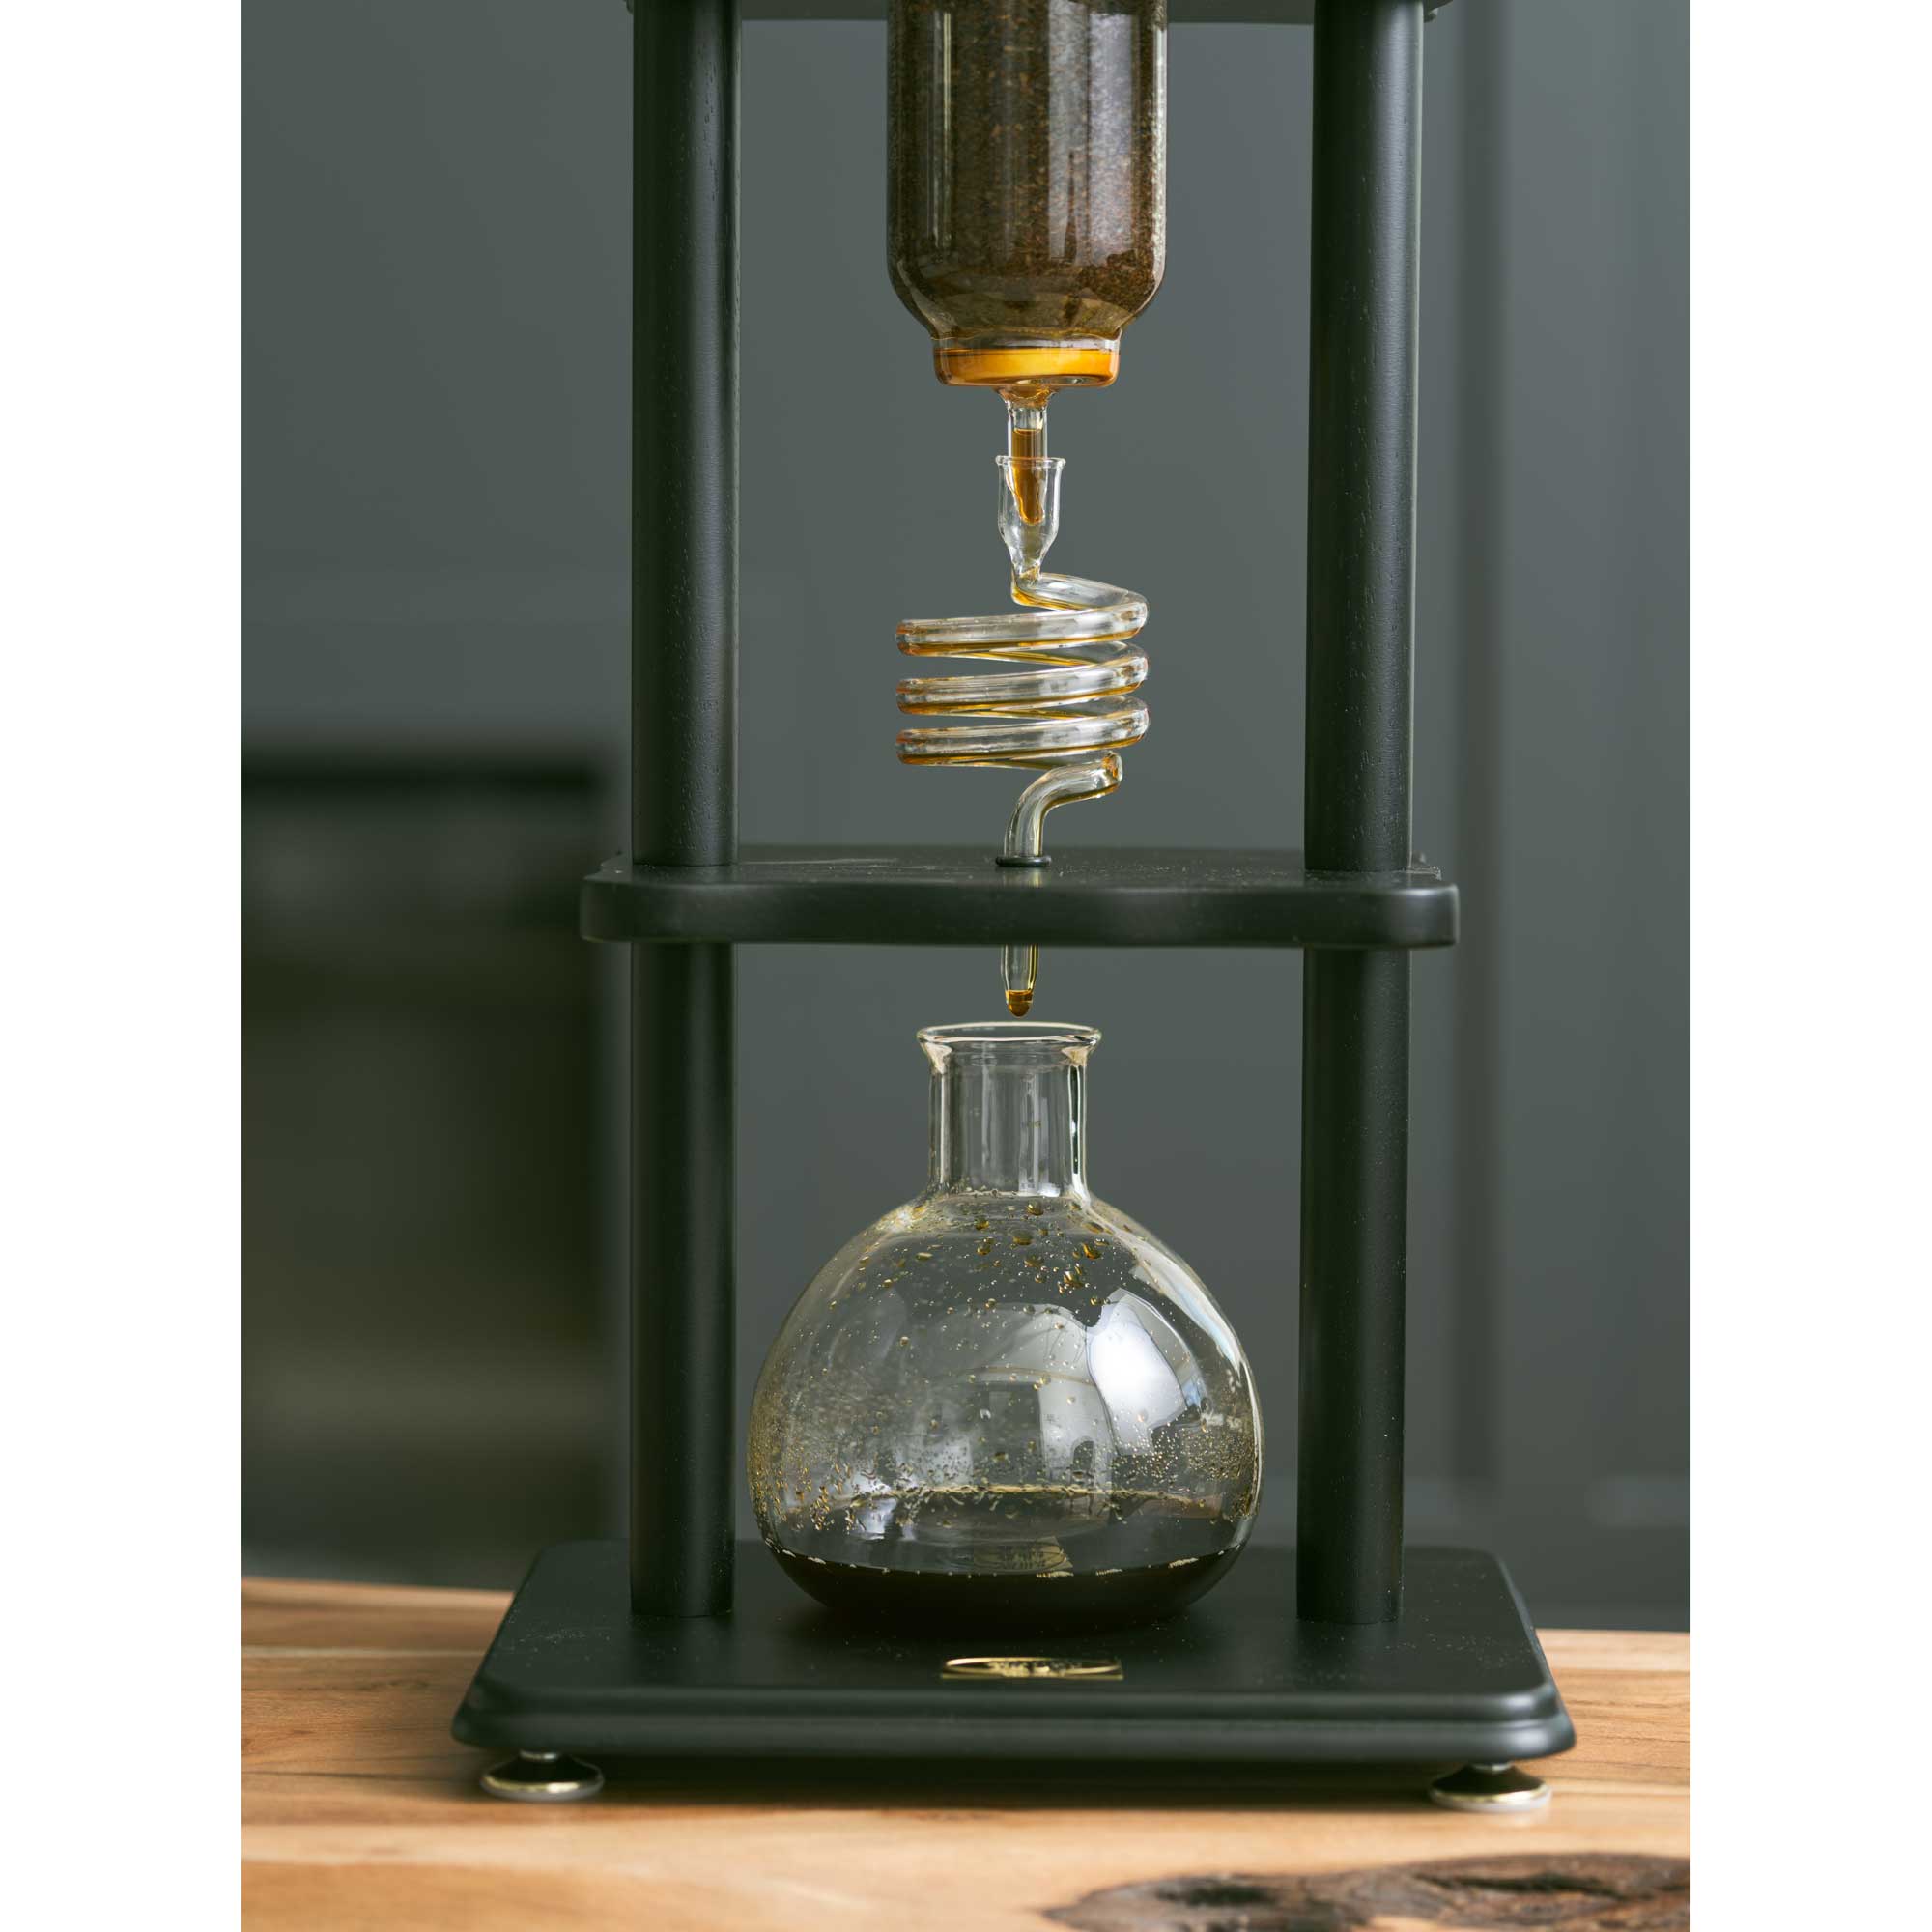 Yama 25 Cup Cold Drip Maker Curved Brown Wood Frame (100oz)